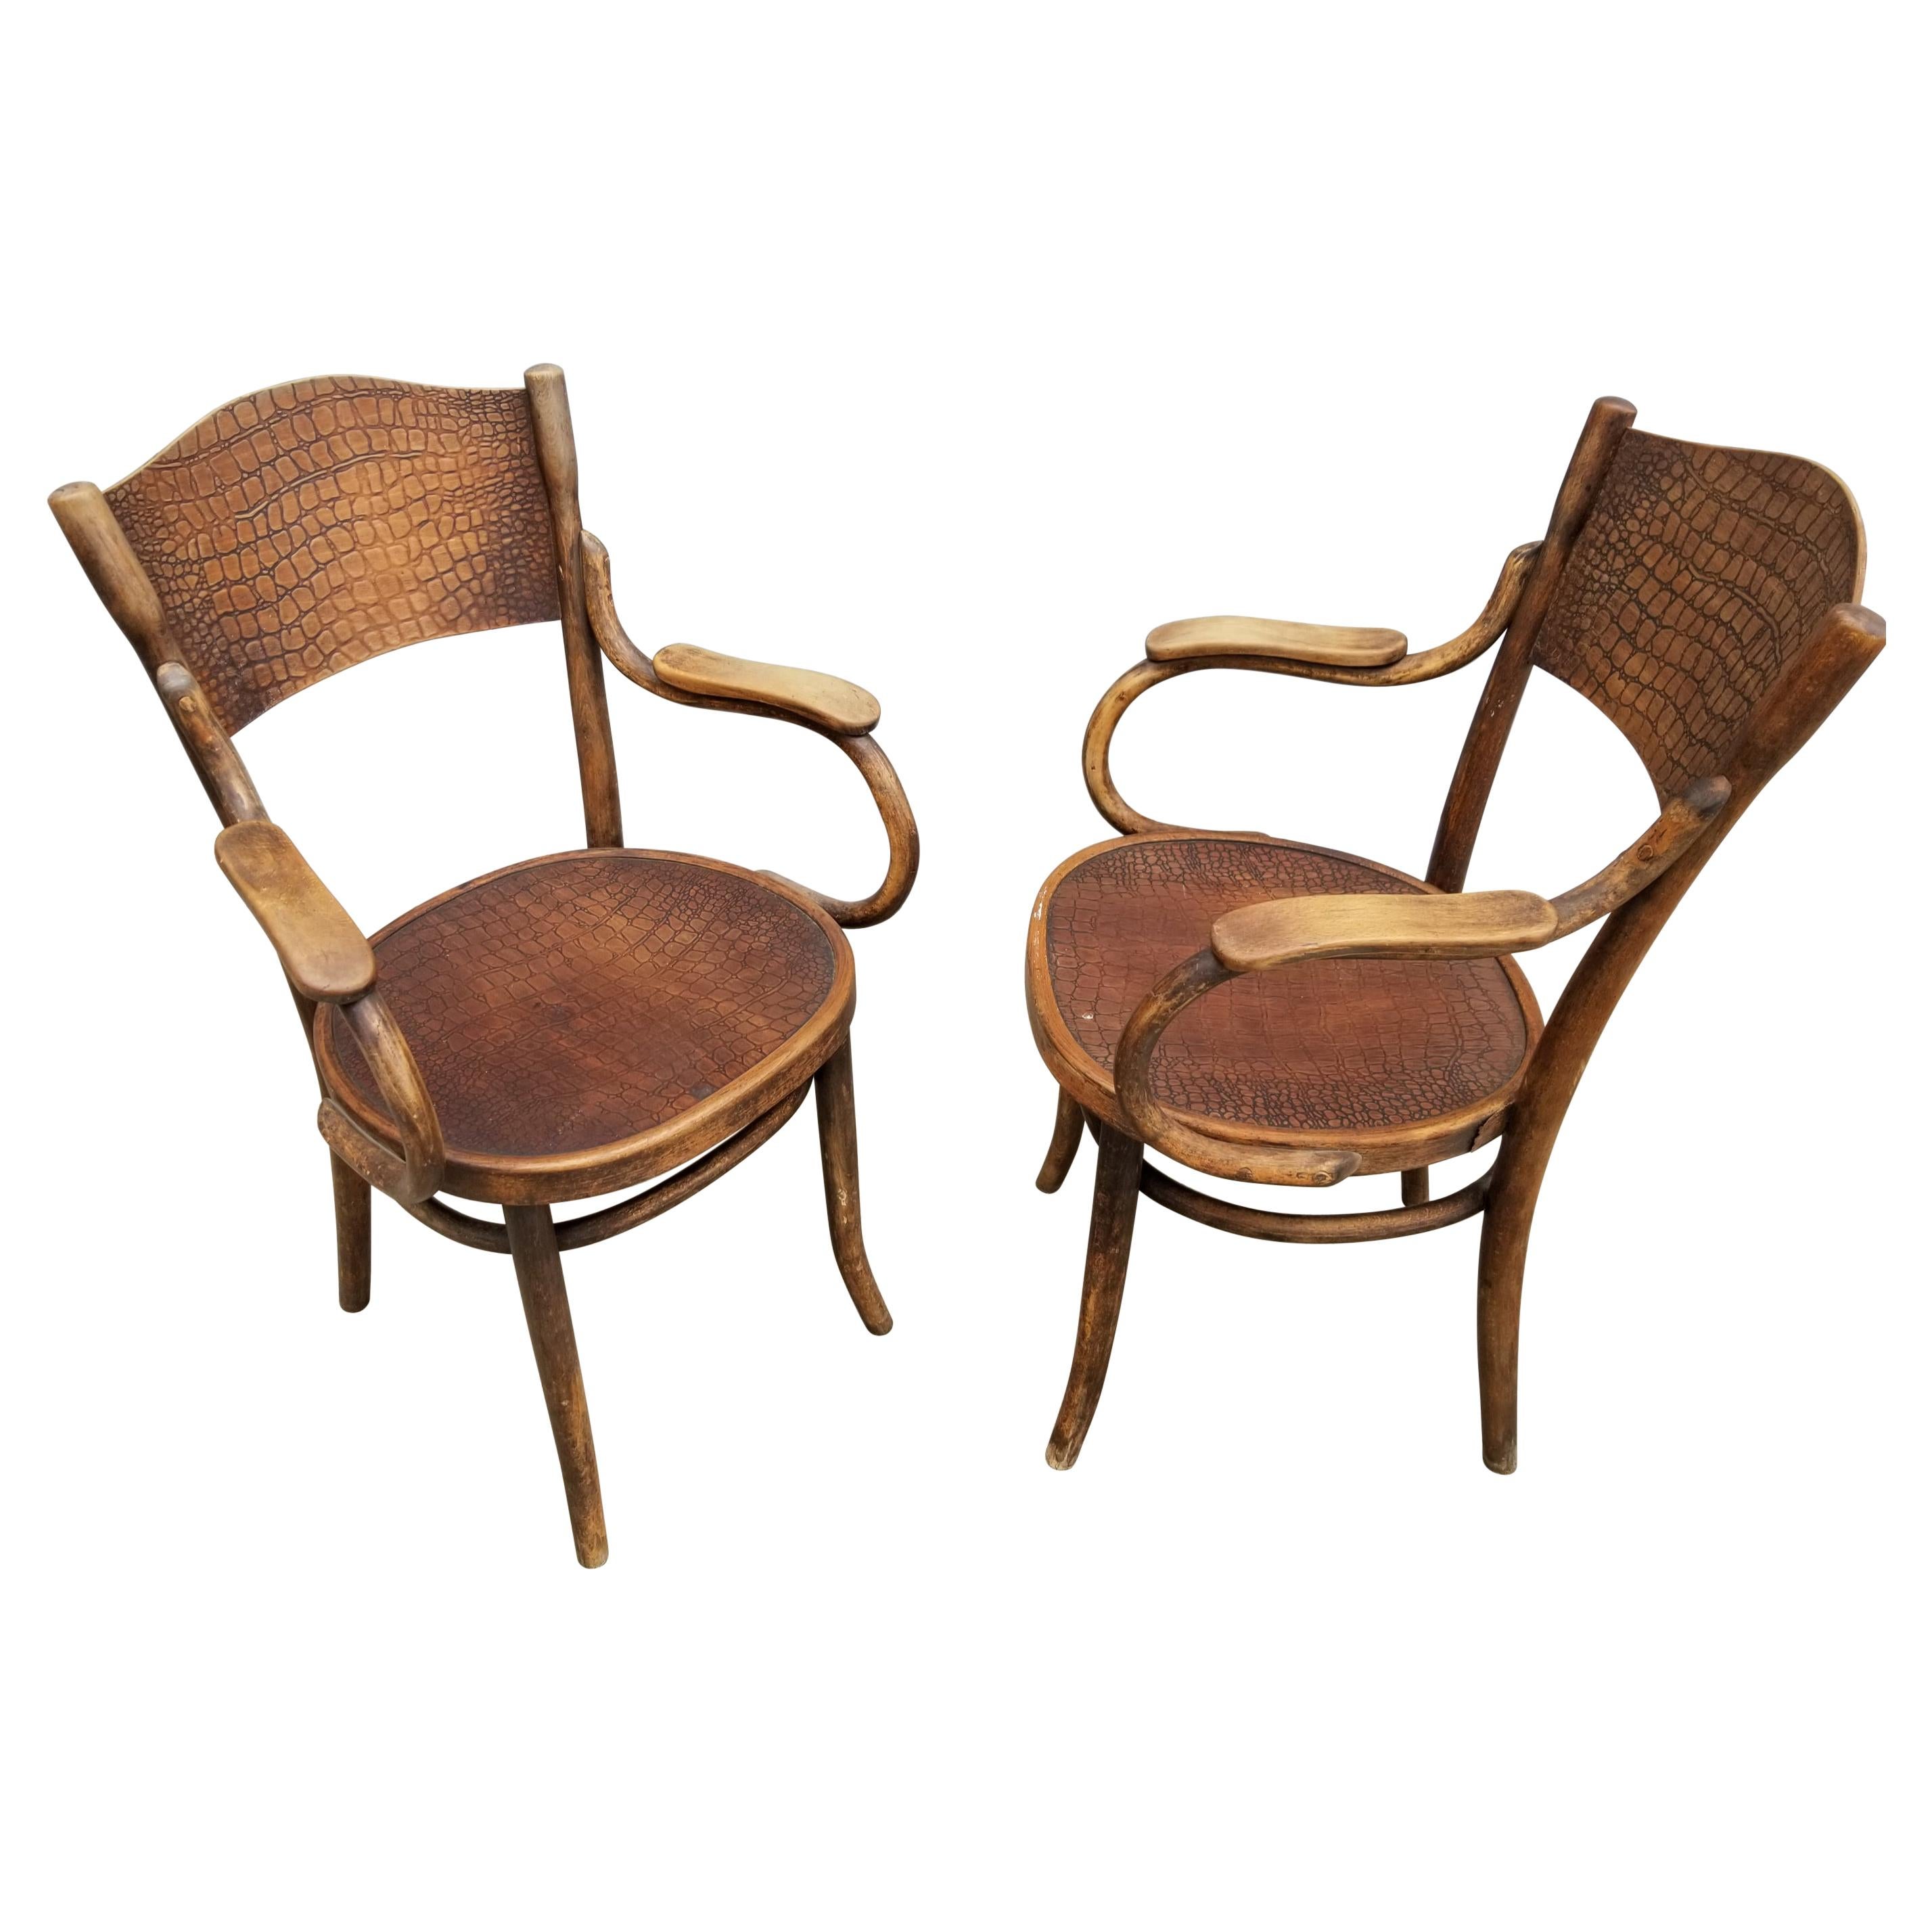 Pair of Thonet Bentwood Chairs Early 20th Century